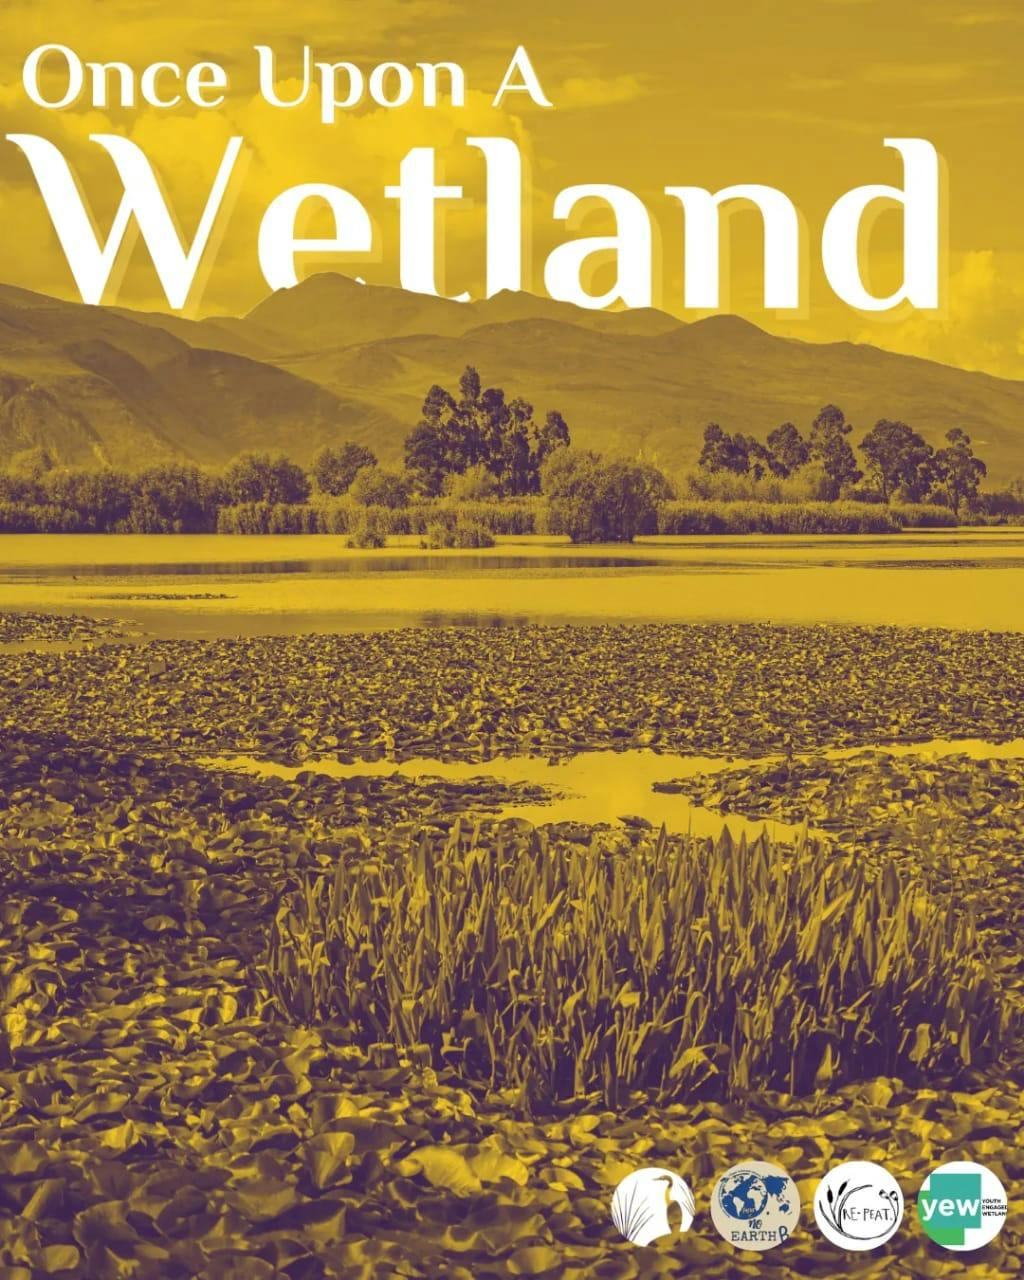 Once Upon A Wetland